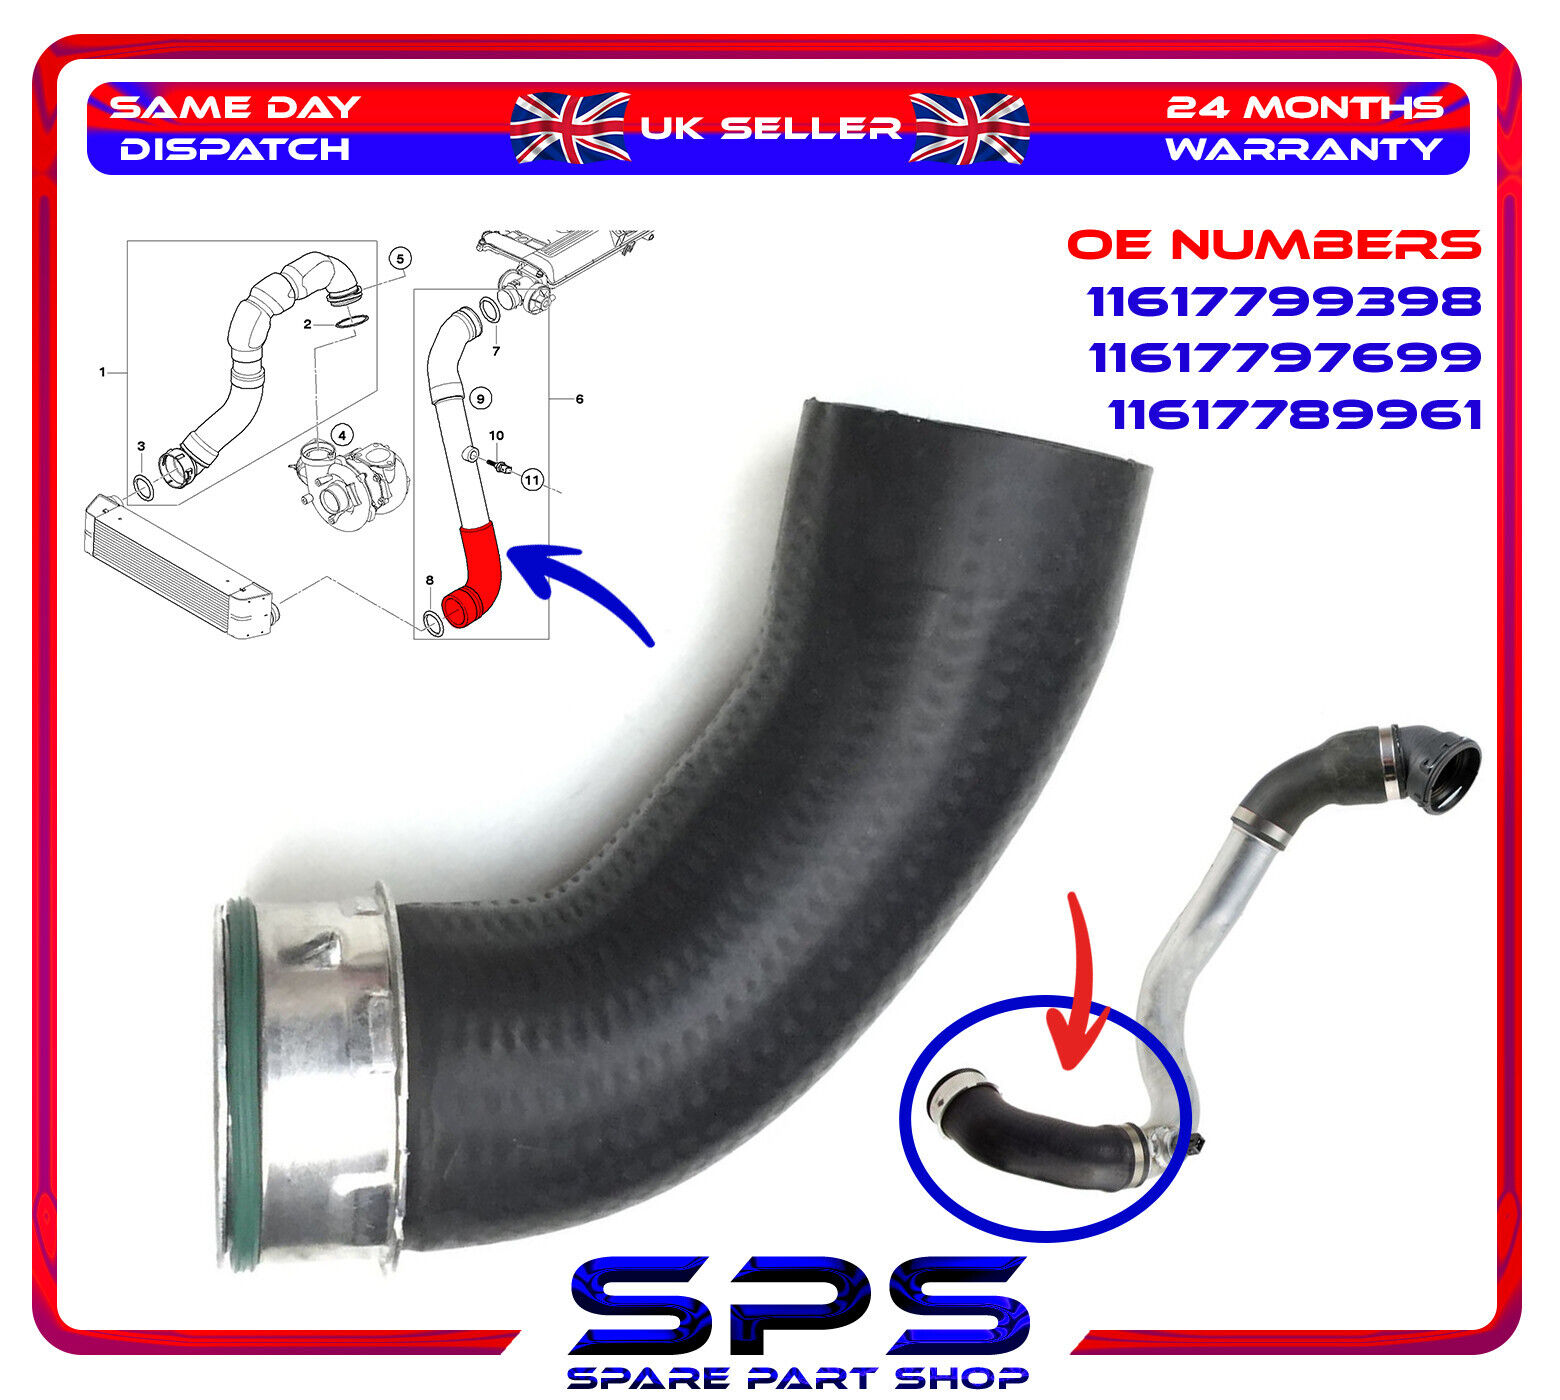 Turbo Air Intake Hose Left Lower For Bmw 3 Series E46 330 D Cd Xd 11617799398